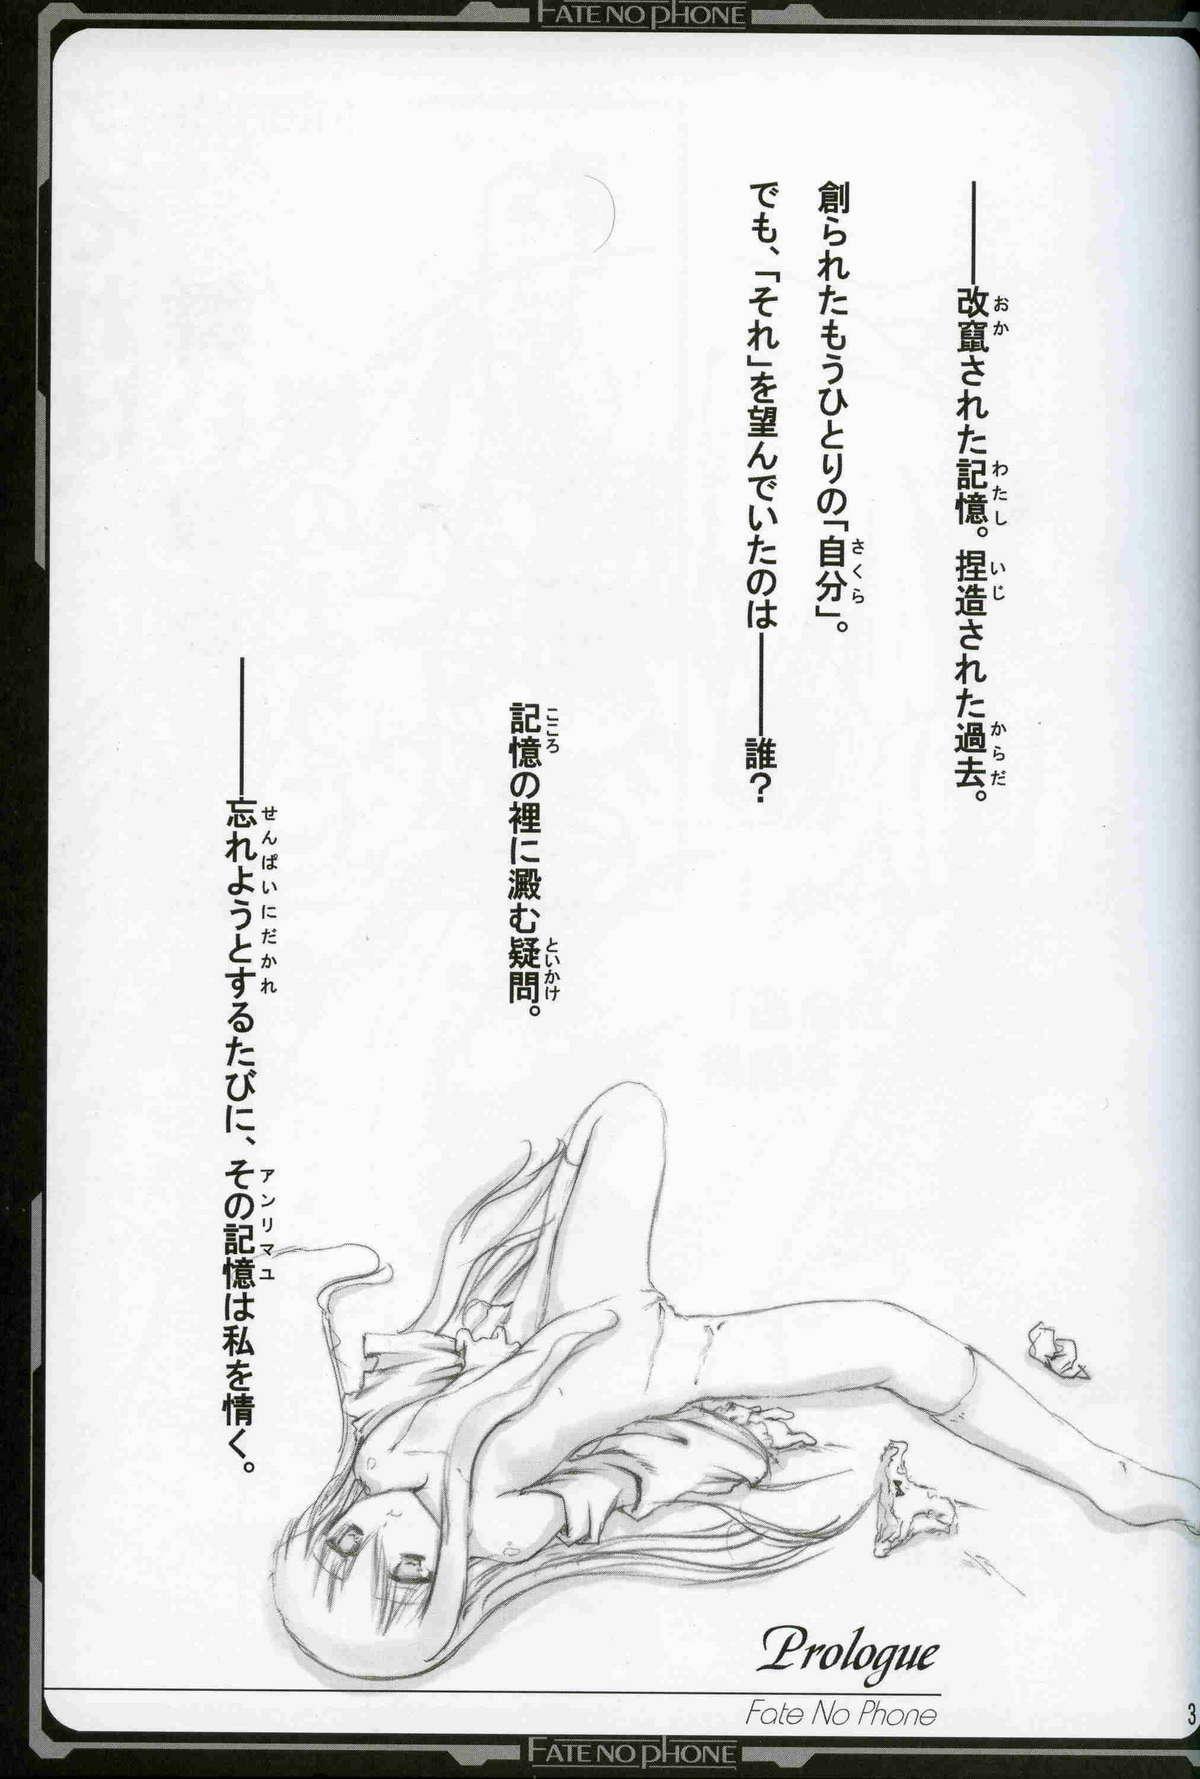 Soapy Fate/no phone - Fate stay night Porn - Page 2